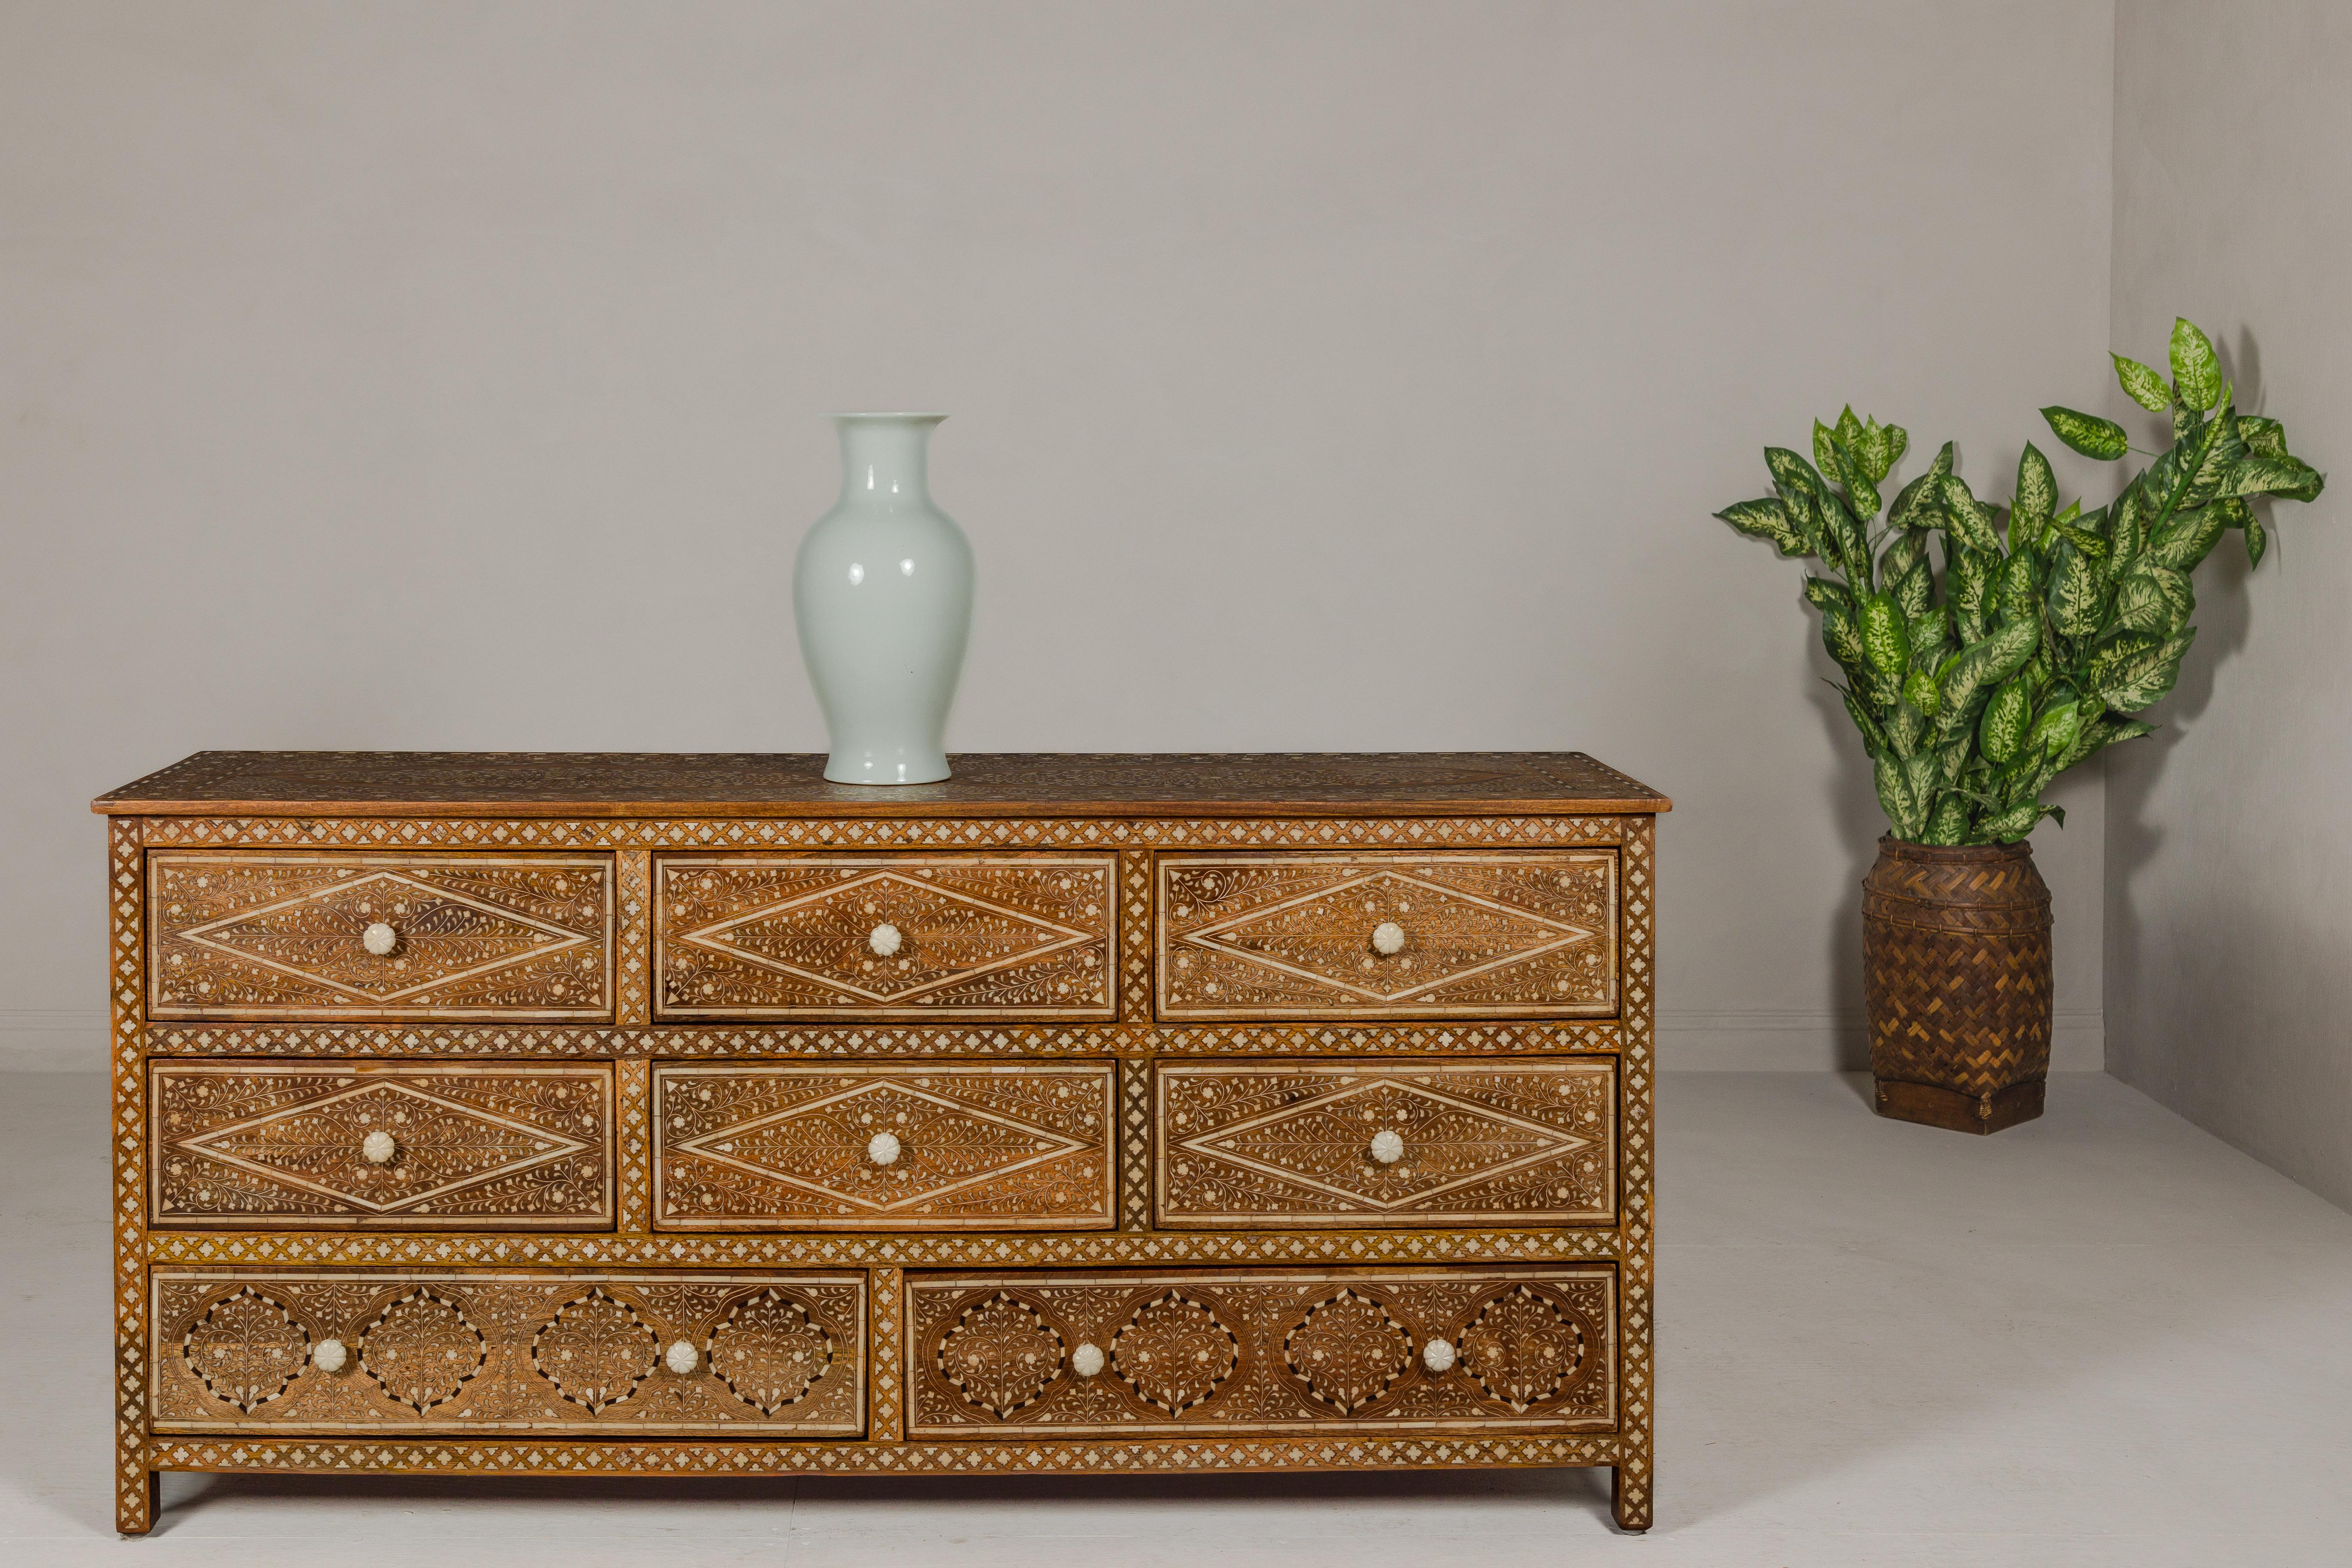 An Anglo-Indian style mango wood dresser with eight drawers, bone inlaid décor showcasing scrolling foliage and bone hardware. Gracefully composed, this Anglo-Indian style mango wood dresser merges the traditional charm of bone inlay with the robust